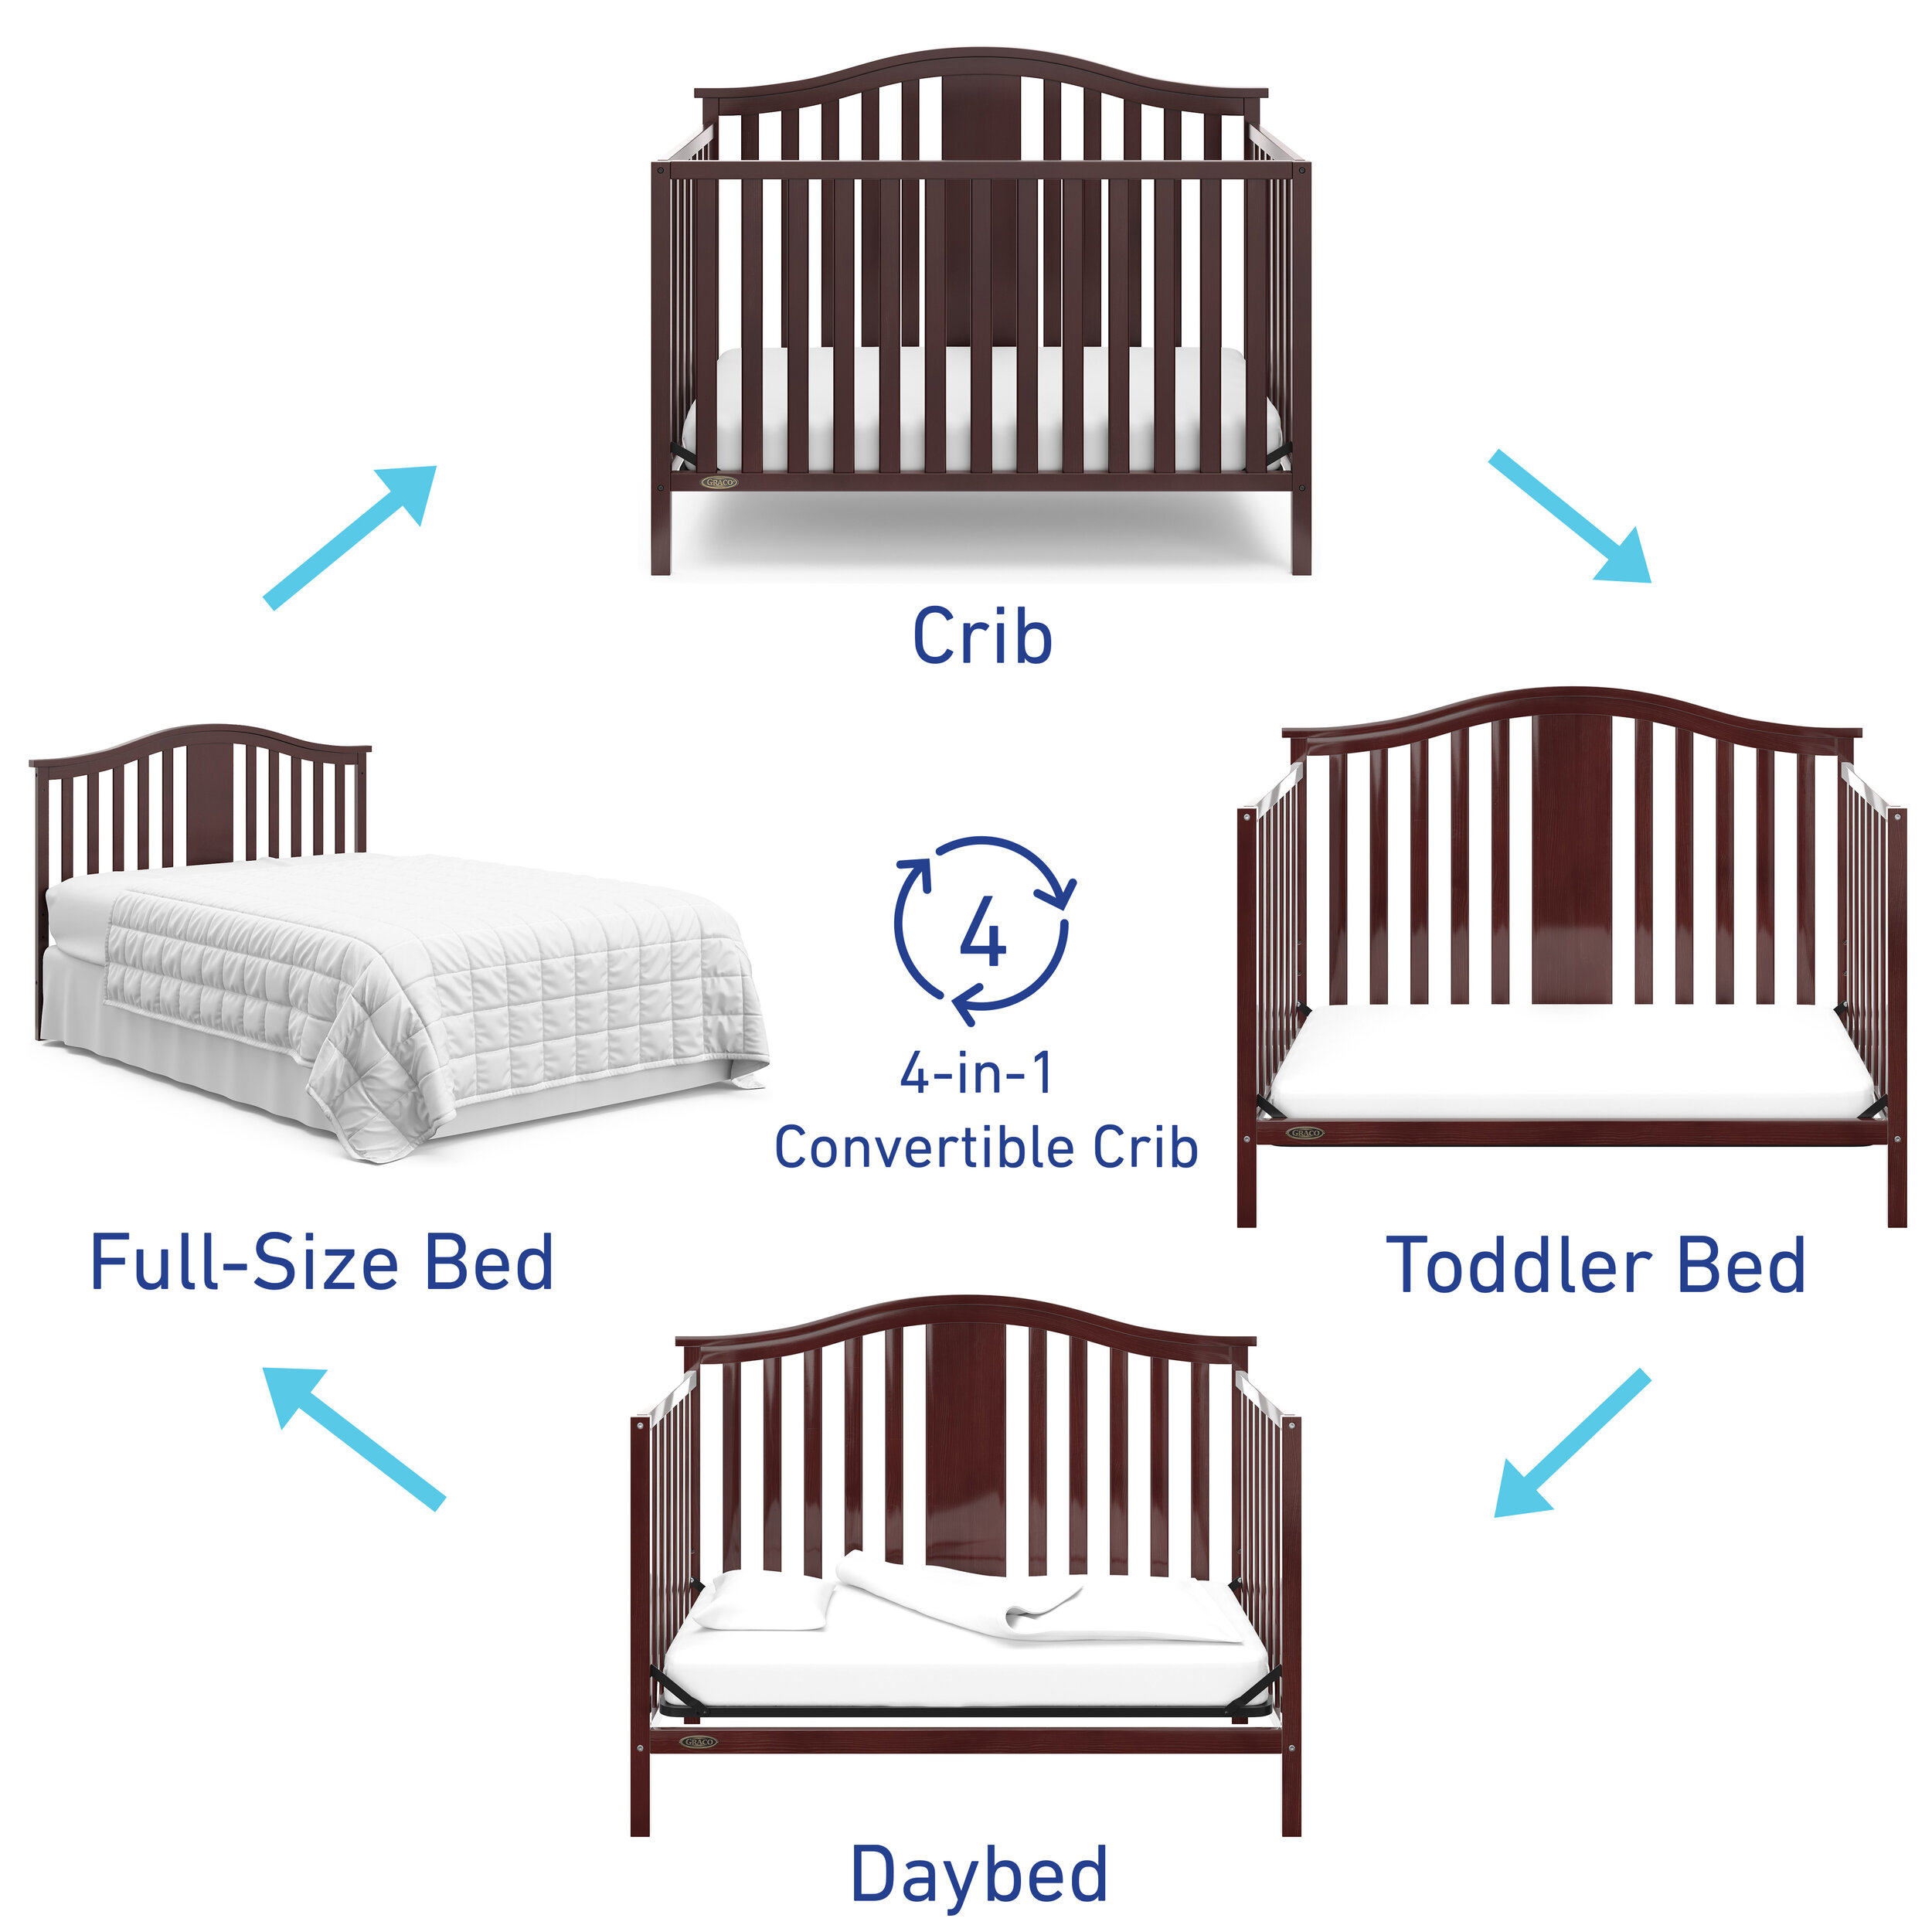 Some Assembly Required Three Position Adjustable Height Mattress Graco Bryson 4-in-1 Convertible Crib Easily Converts to Toddler Bed Day Bed or Full Bed Espresso Mattress Not Included